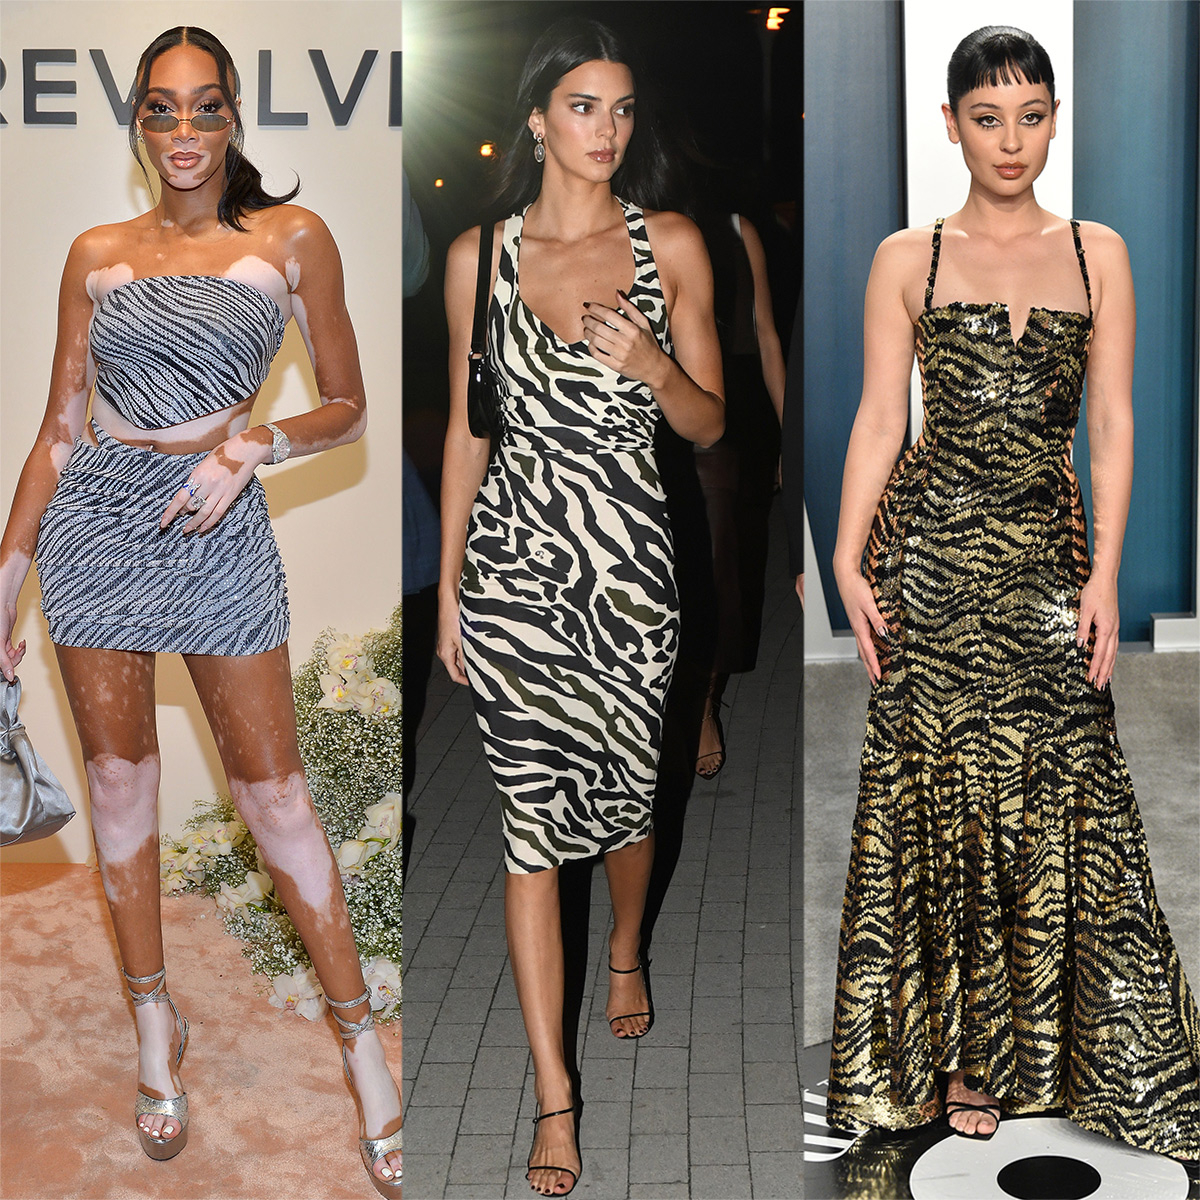 Show Your Stripes With the It Girl-Approved Zebra Trend